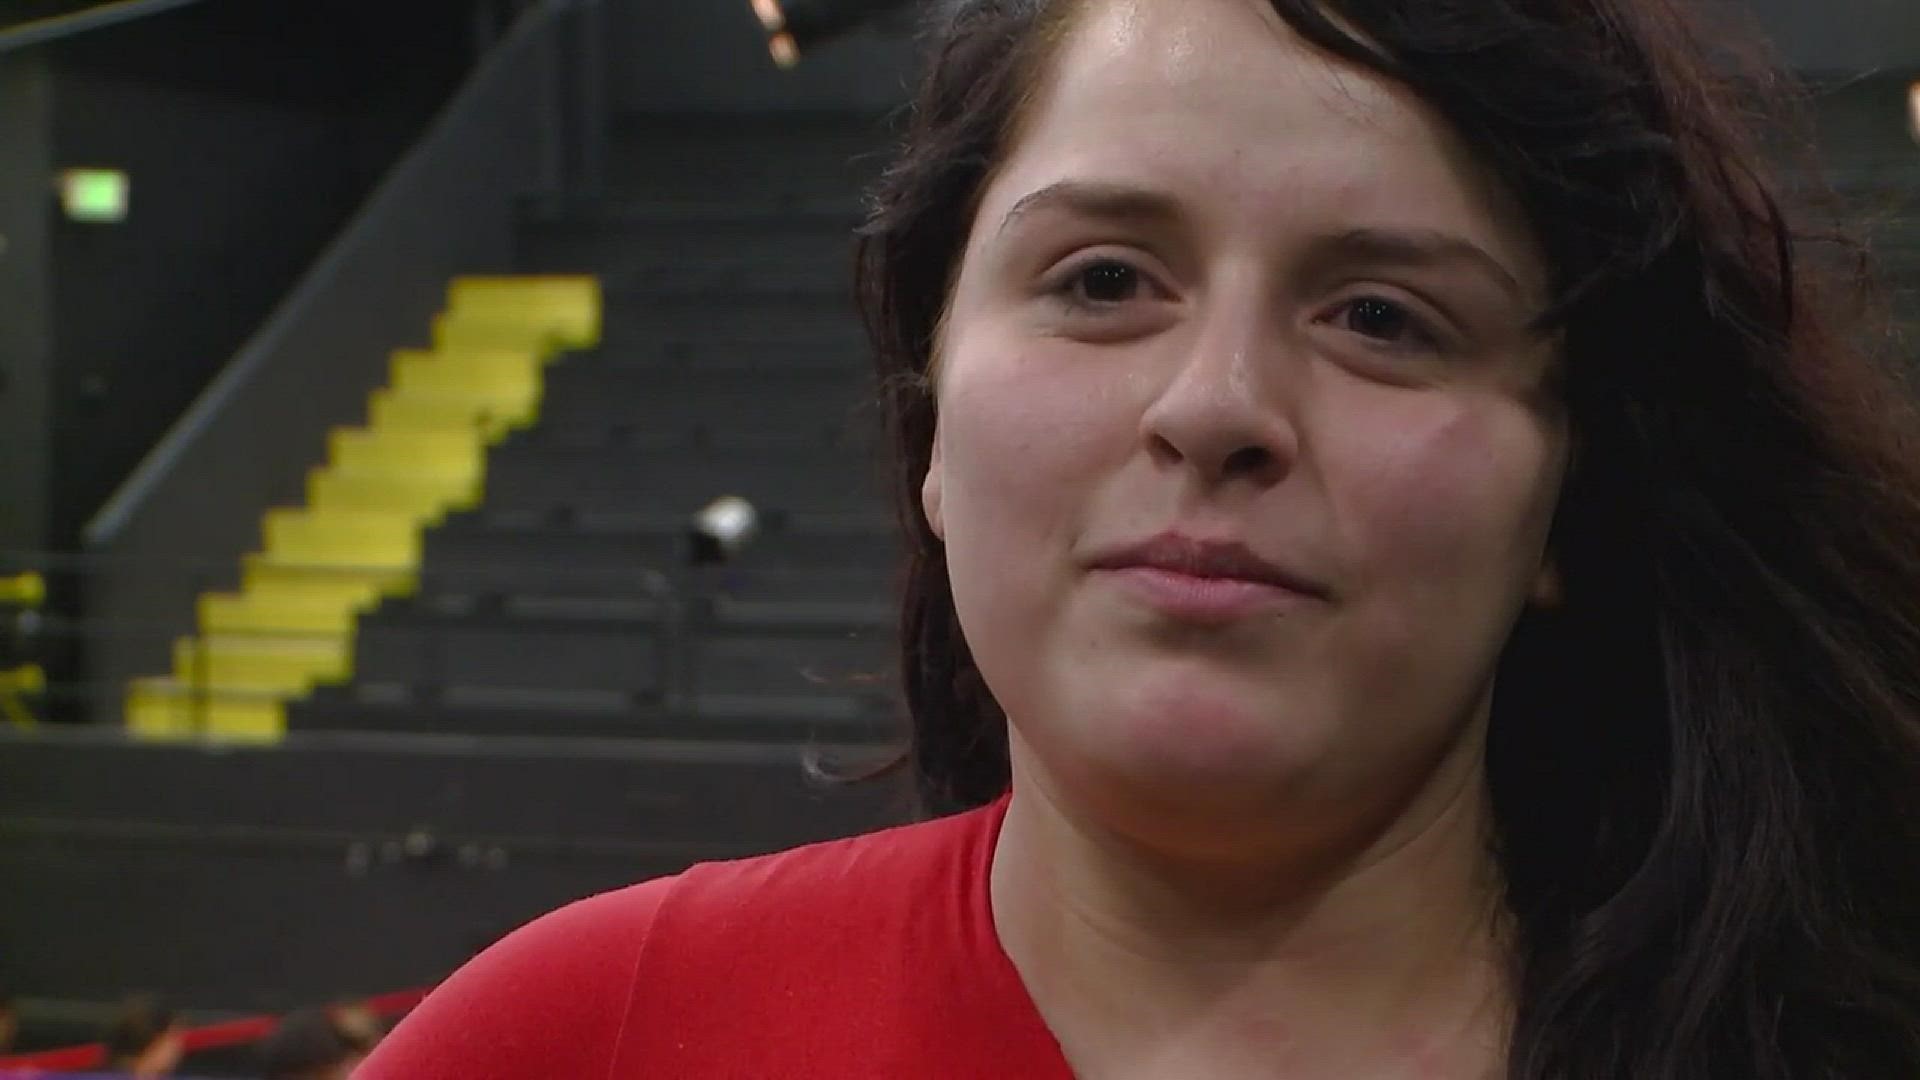 Wrestling has long been a male dominated sport, but that's started to change in recent years on a national and local level. Alexandria "Allie Gato" Ortega talked with us about where women's wrestling stands now and what she hopes to see in the future.